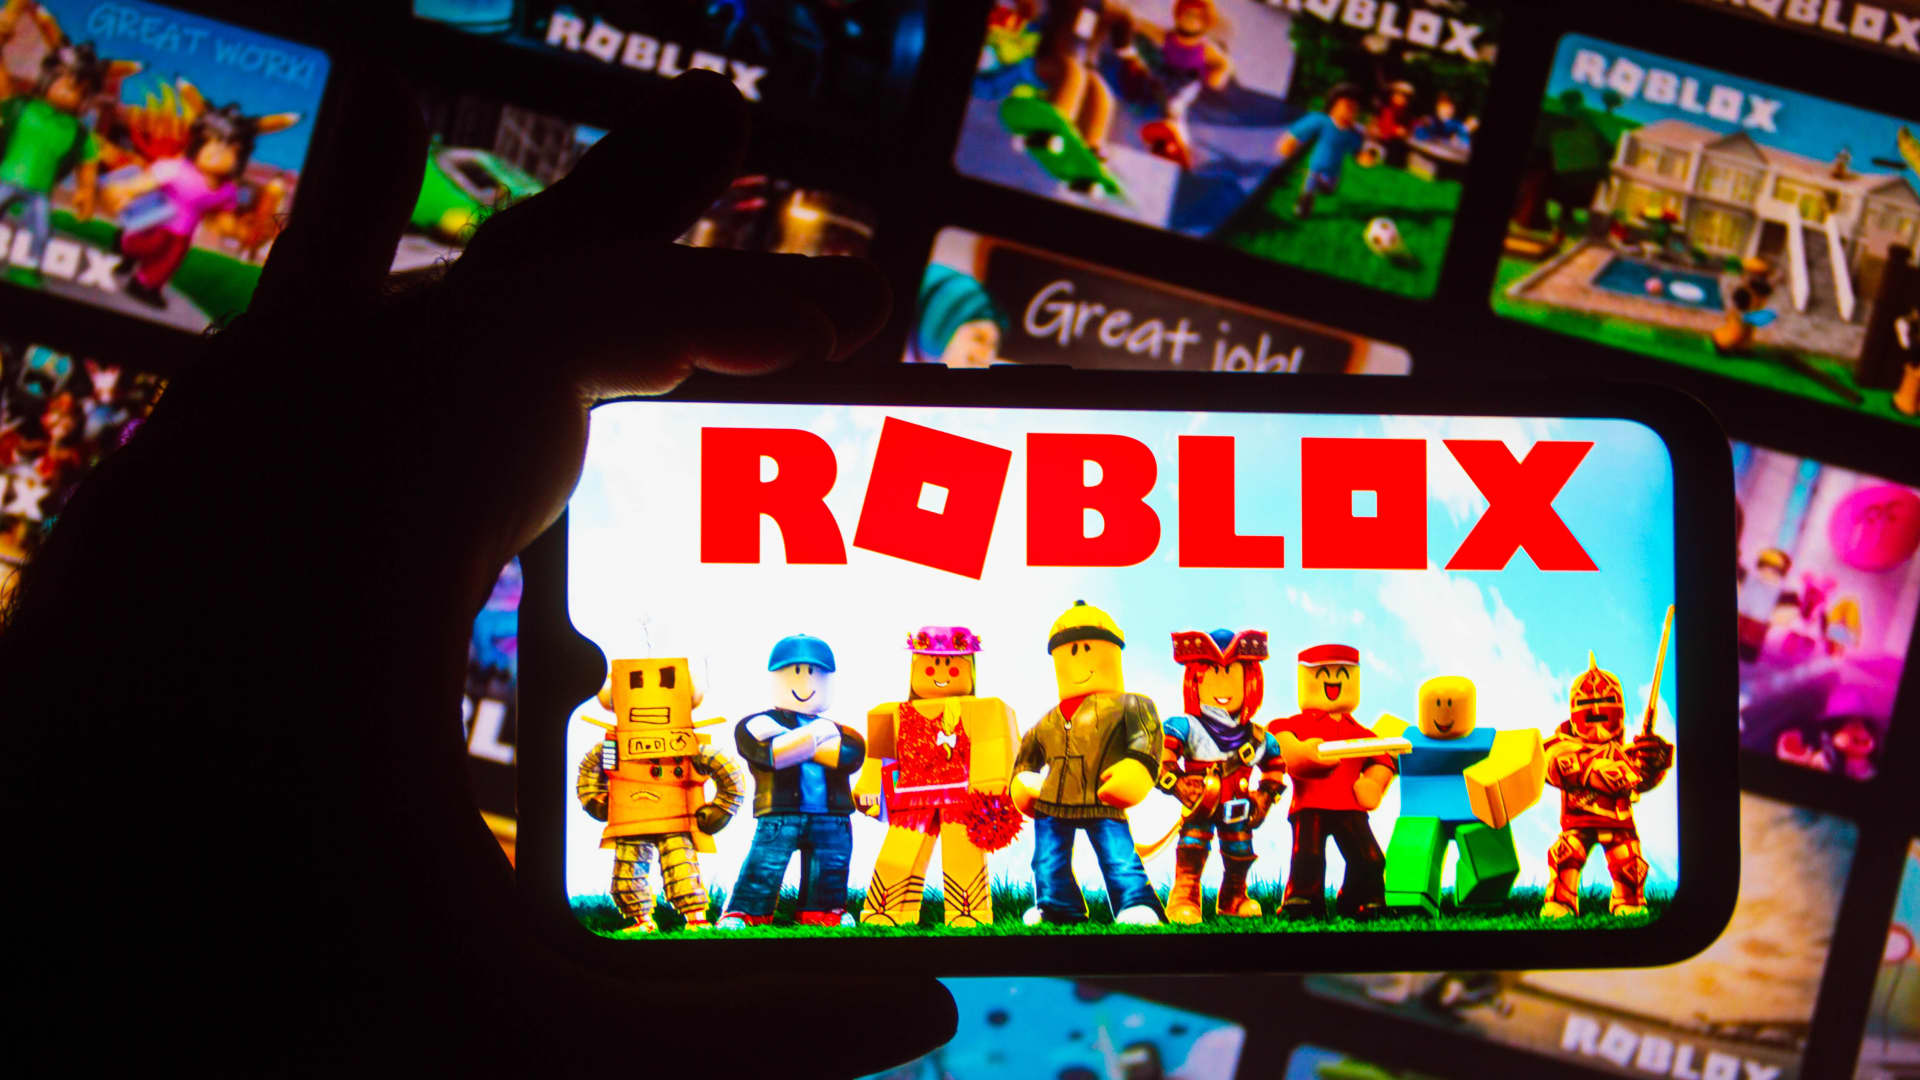 The Roblox logo displayed on a smartphone.